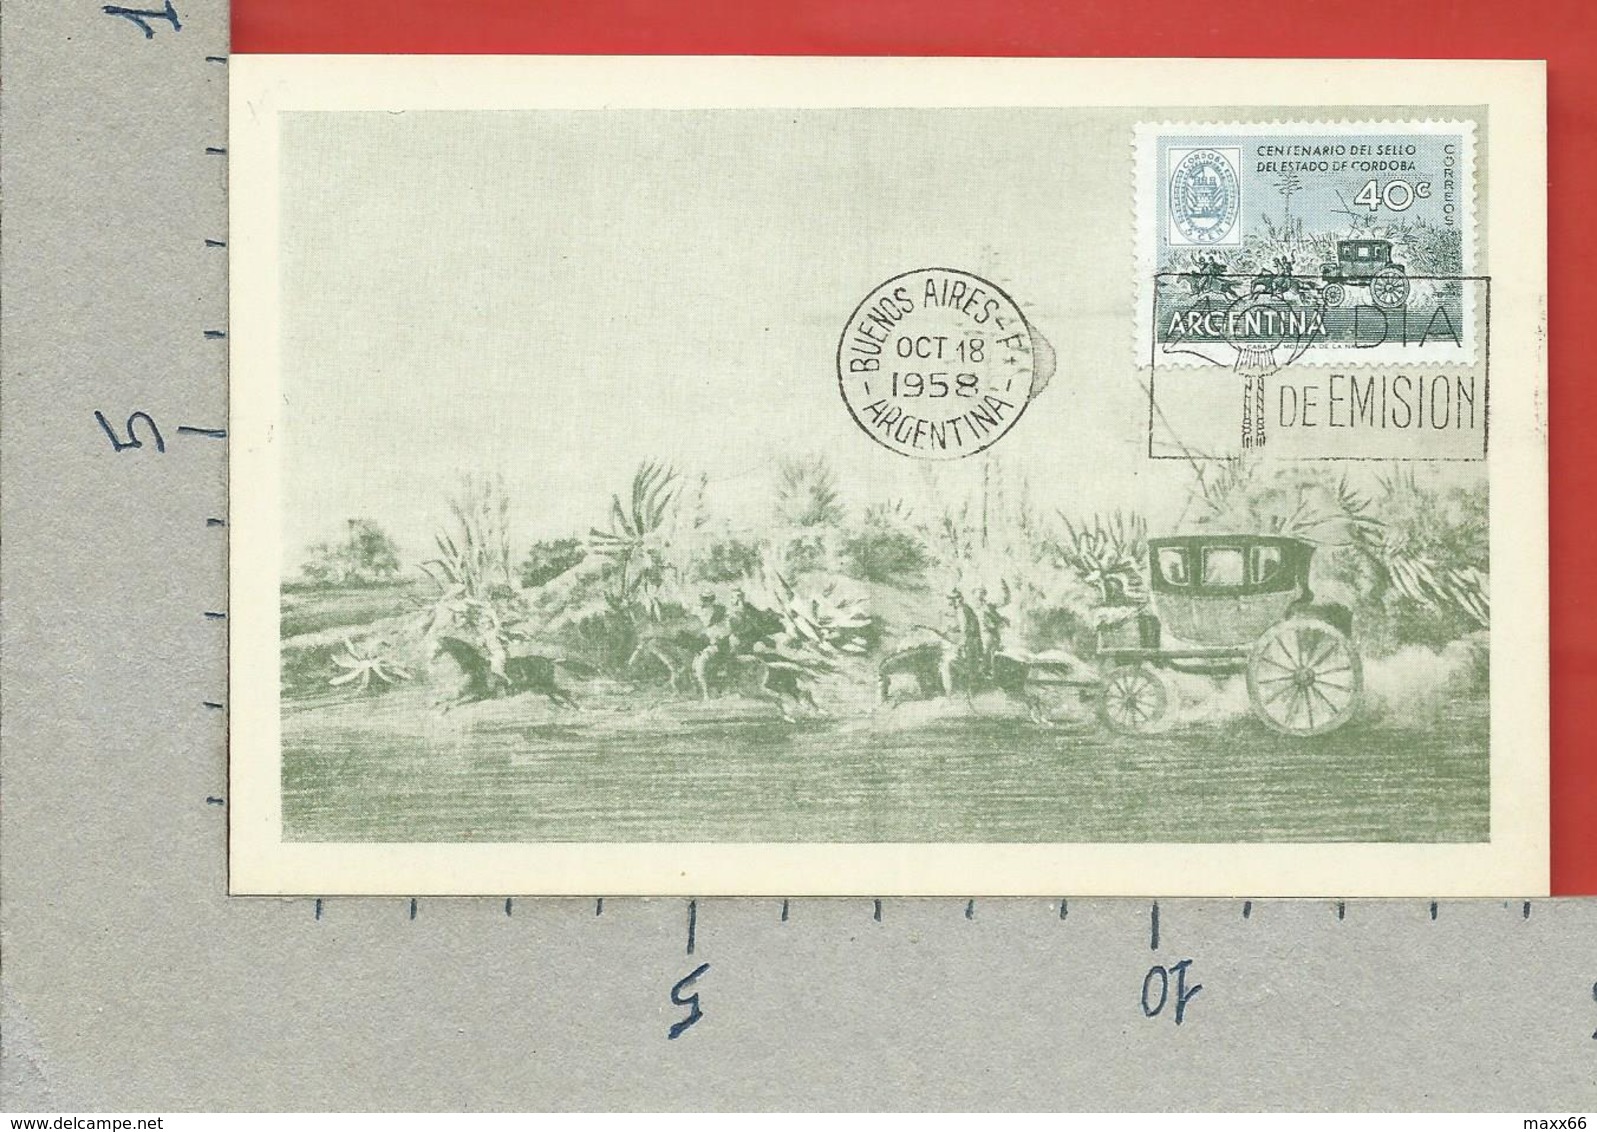 ARGENTINA FDC - 100th Anniversary Of The Argentine Confederation Stamps - 9 X 14 - 18 - 10 - 1958 - Argentina